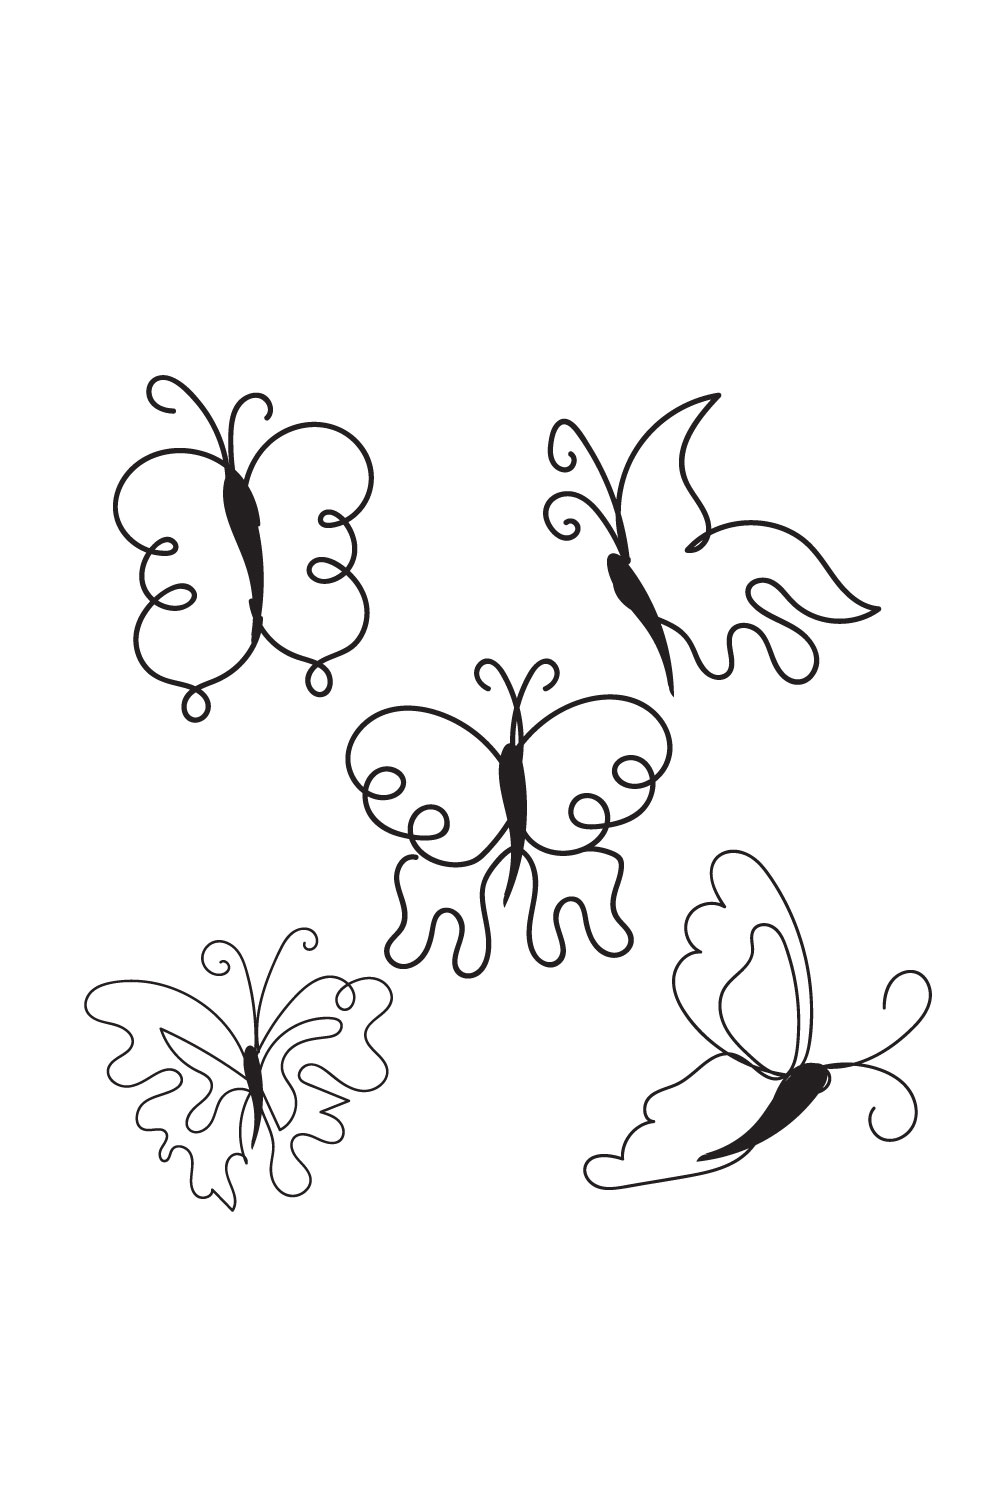 Drawing of three butterflies flying in the air.